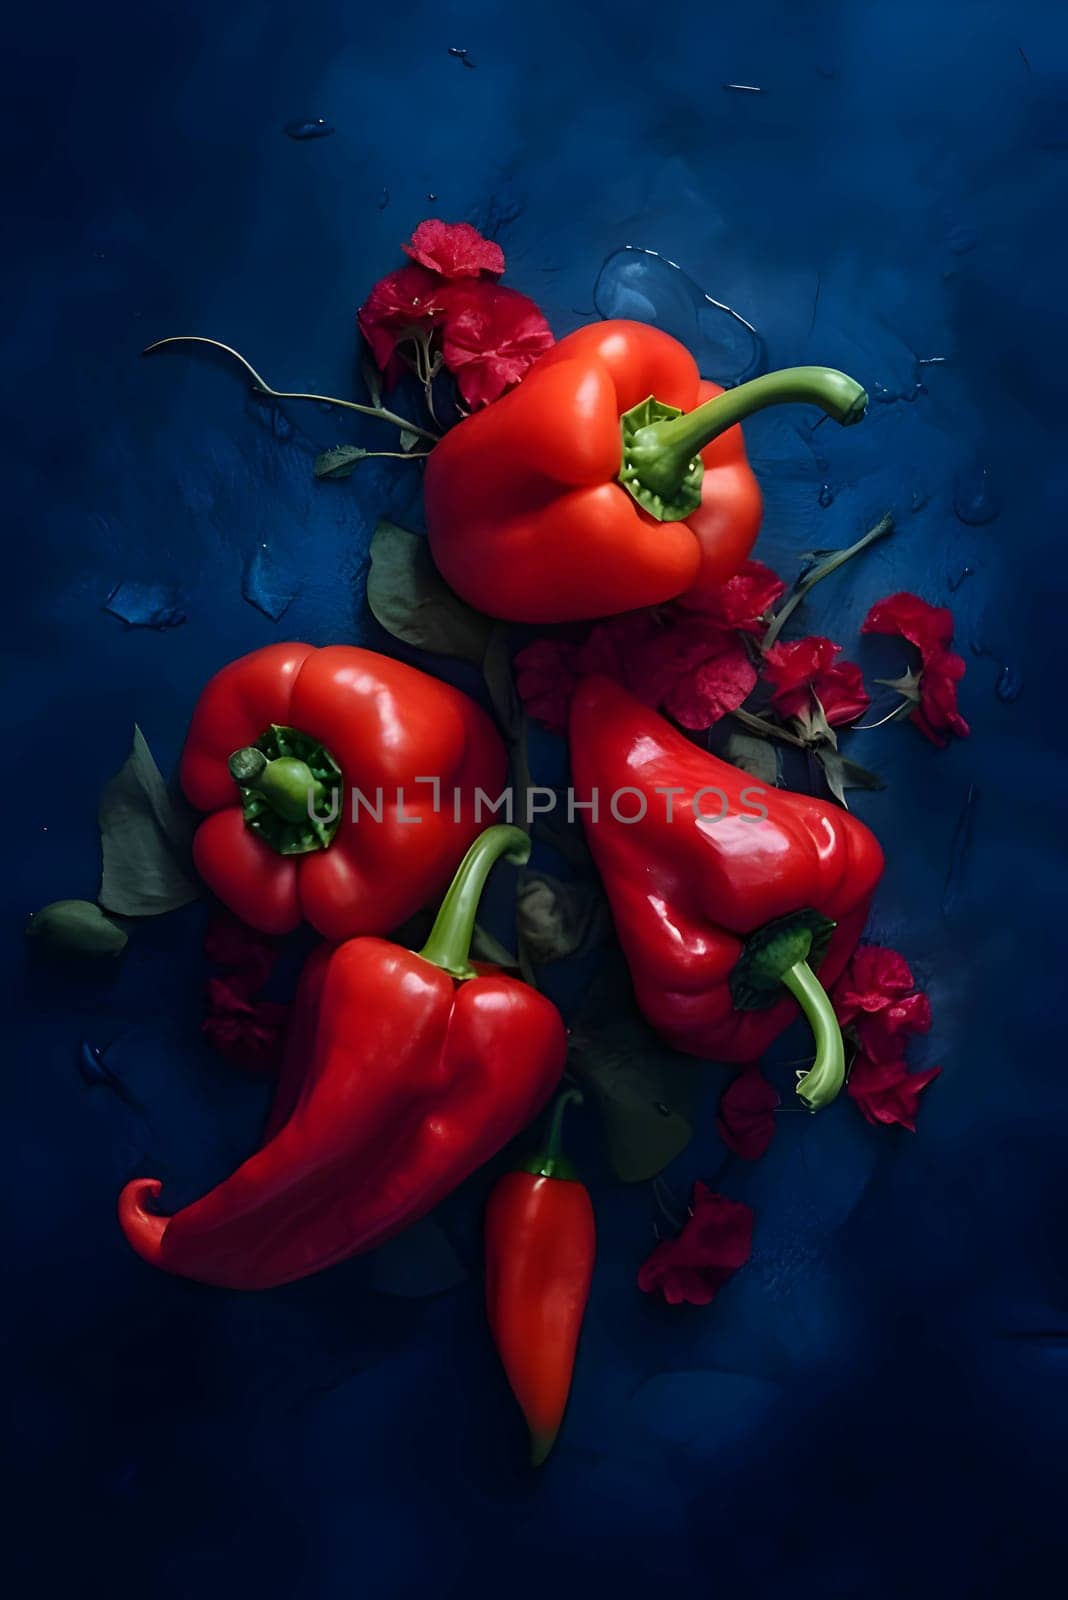 An abstract background wallpaper adorned with red hot chili peppers, creating a visually striking and spicy composition.